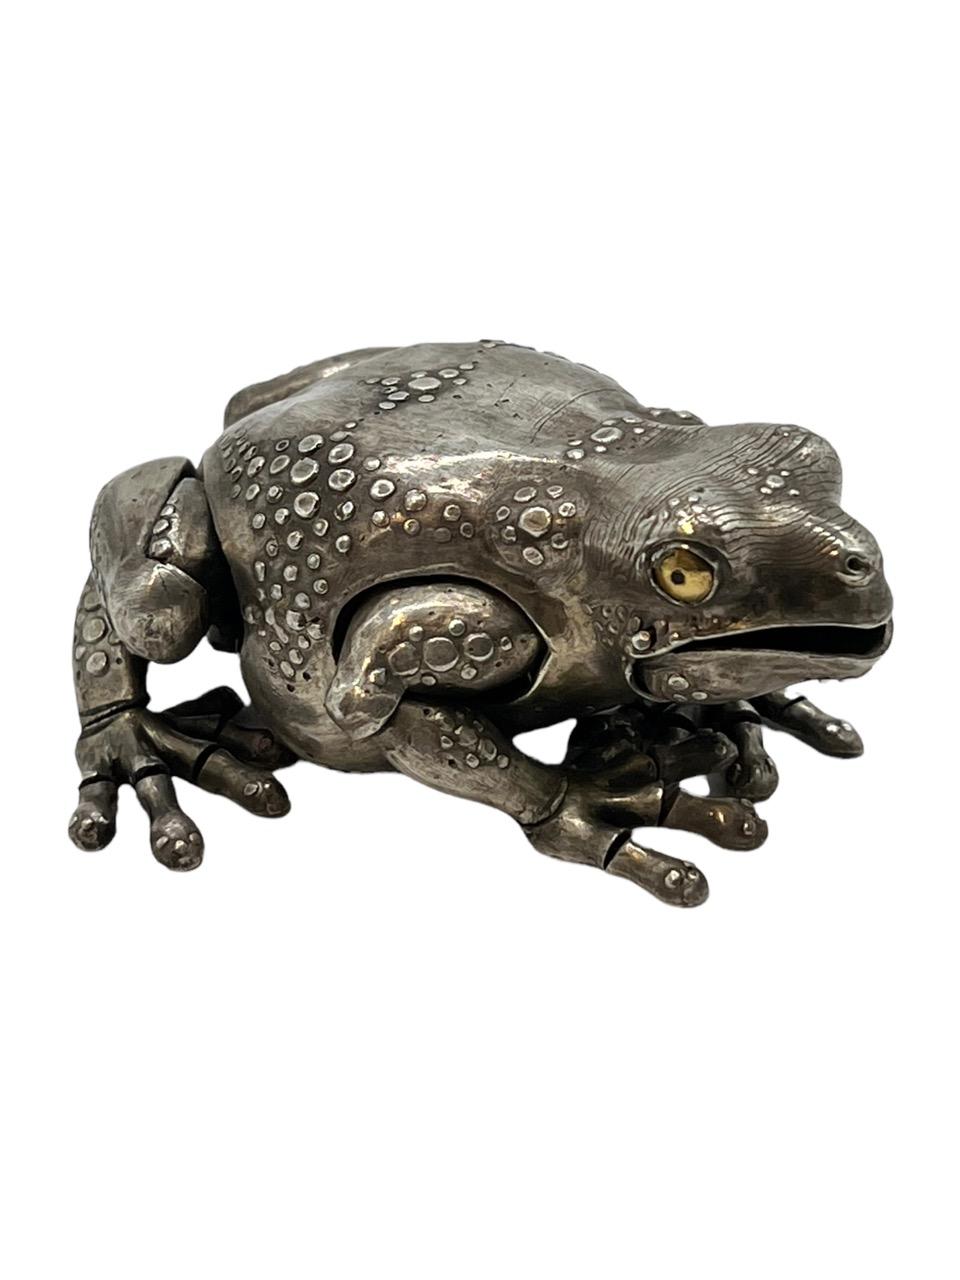 Contemporary Oleg Konstantinov Fully Articulated Frog Made of Sterling Silver For Sale